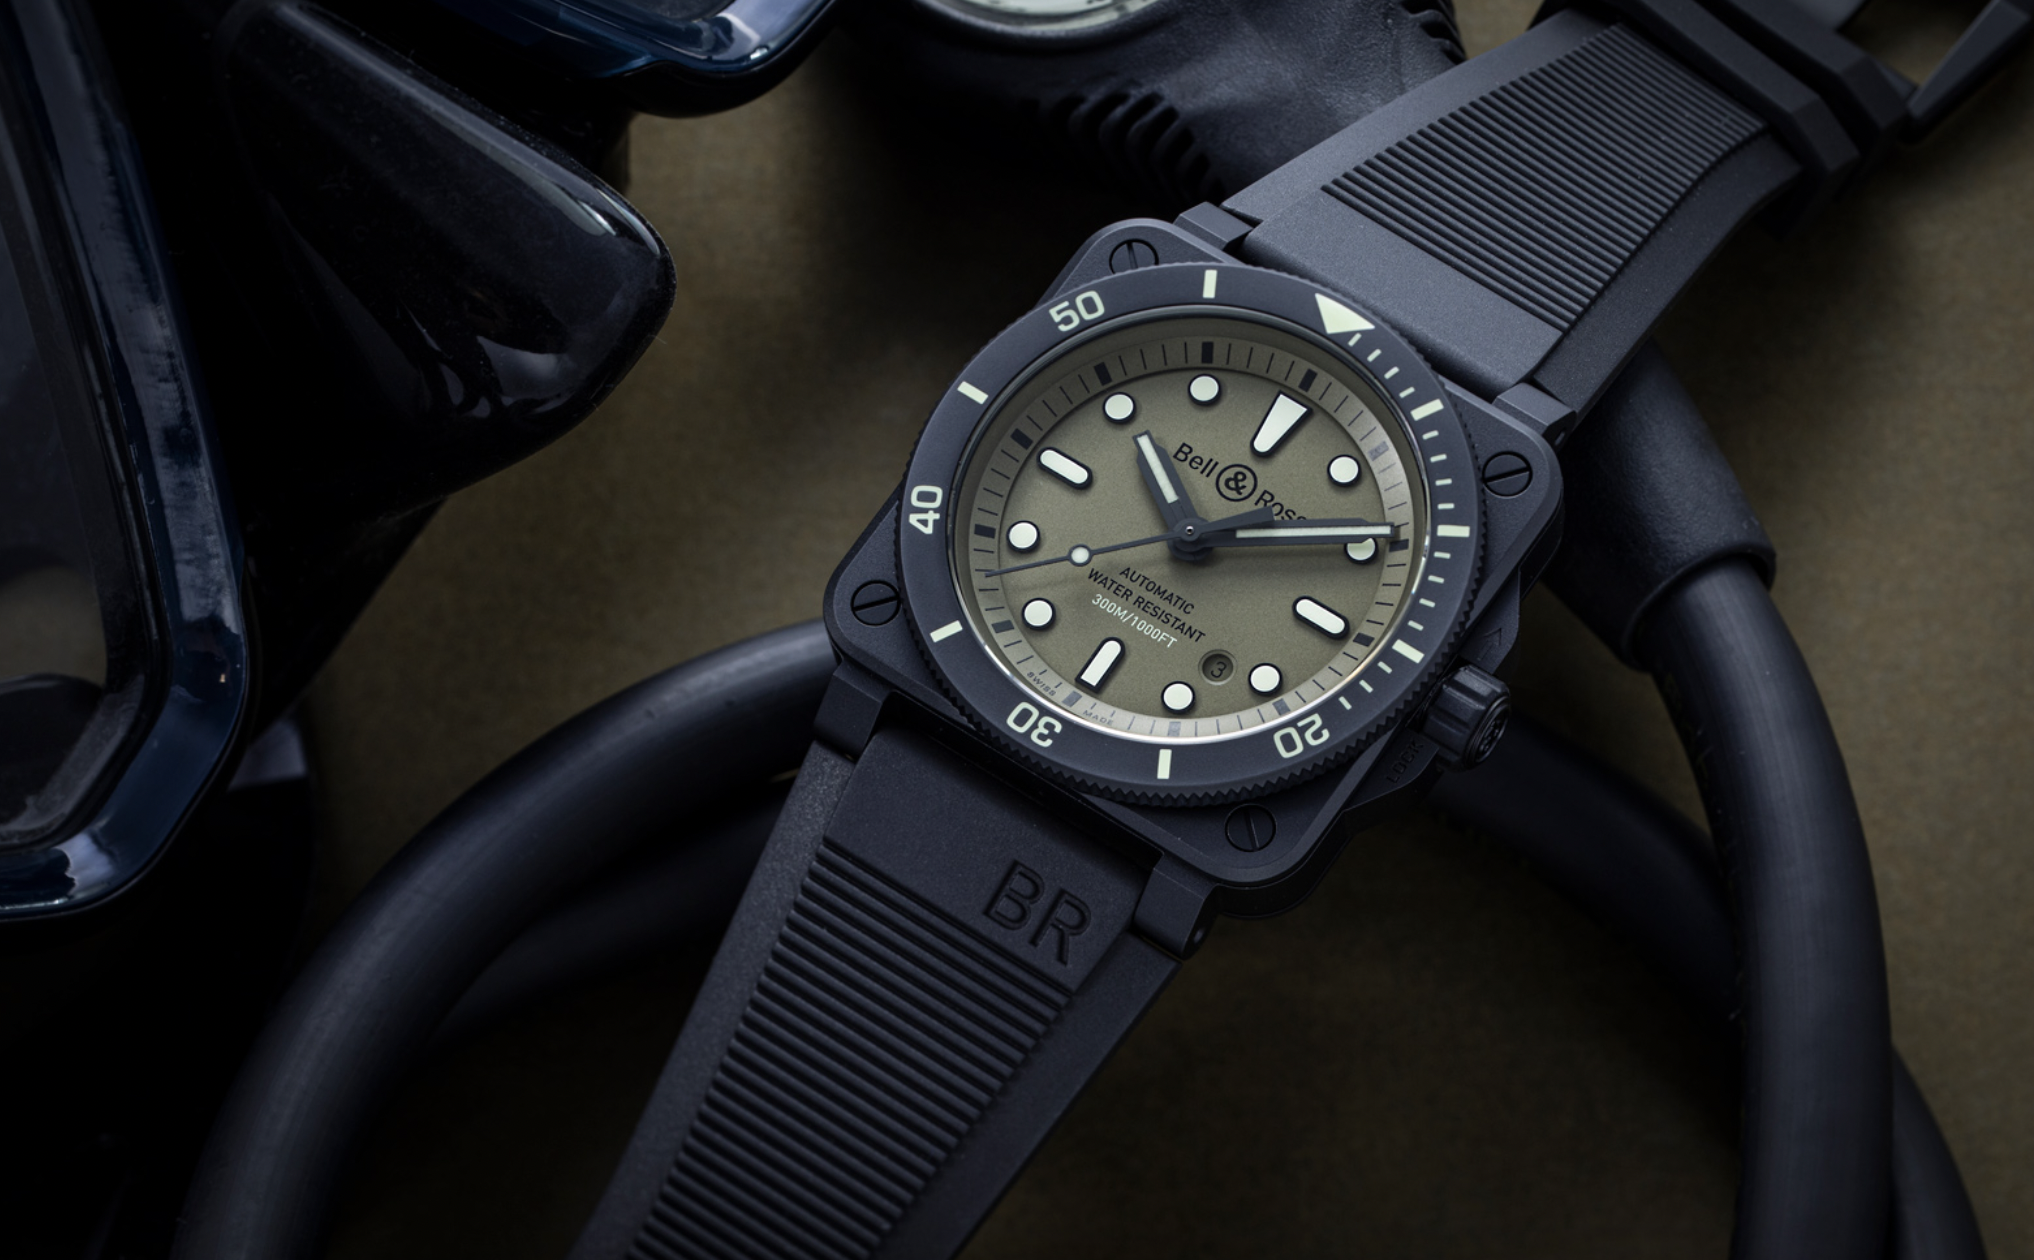 Watch Review: The New Limited Edition Bell & Ross BR 03-92 Diver Military